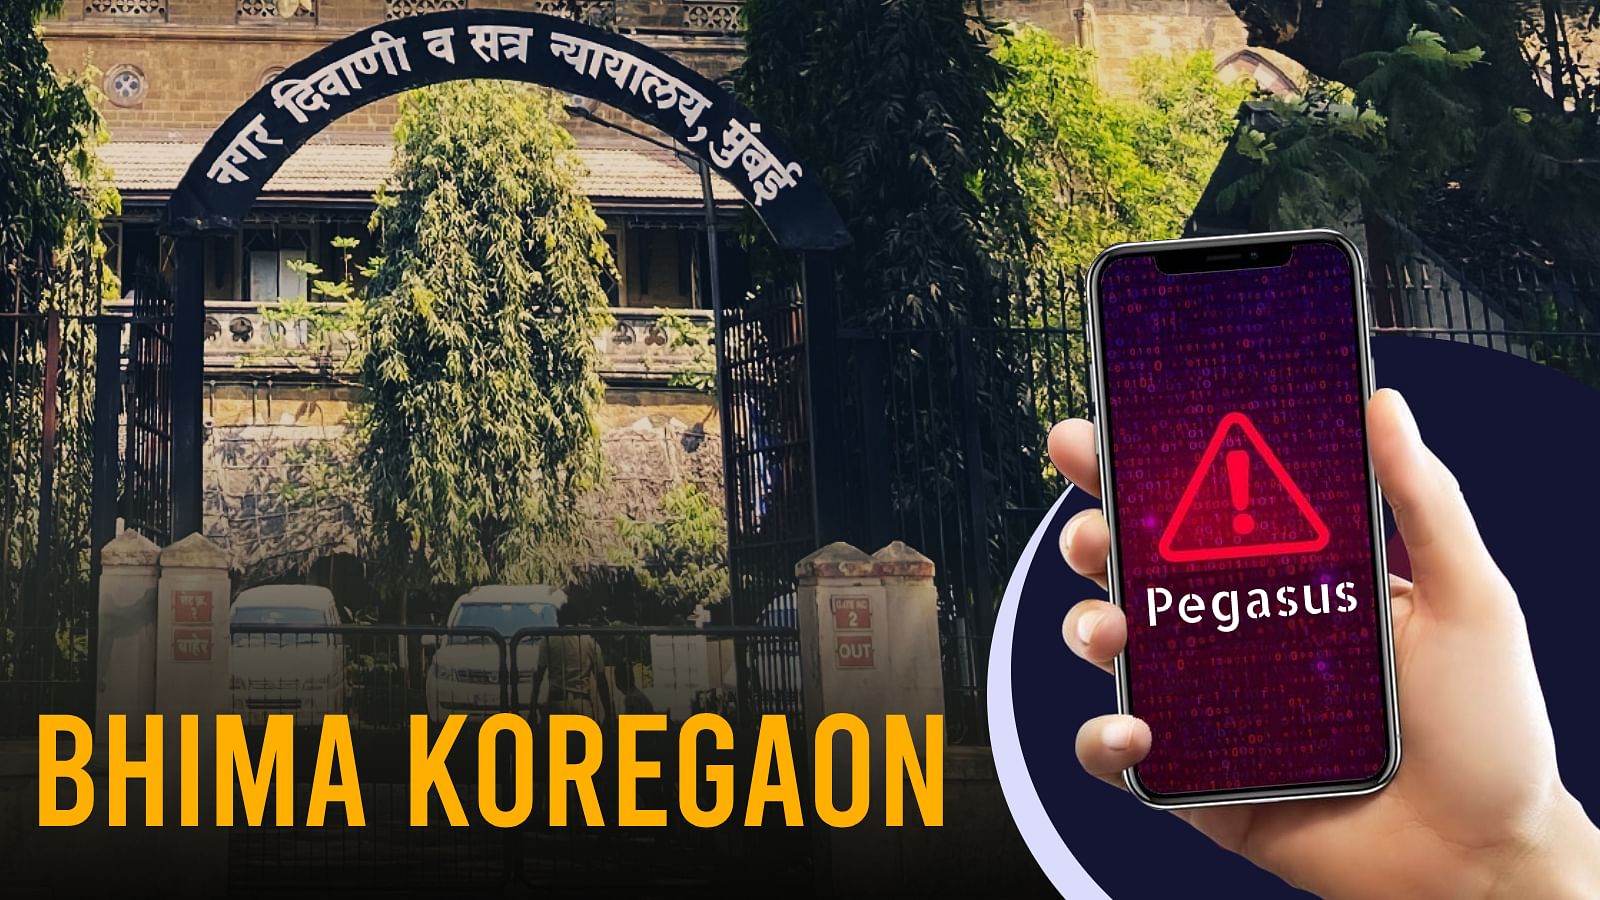 [Bhima Koregaon] NIA moves Special Court for permission to hand over seized phones of 7 accused to Pegasus Committee